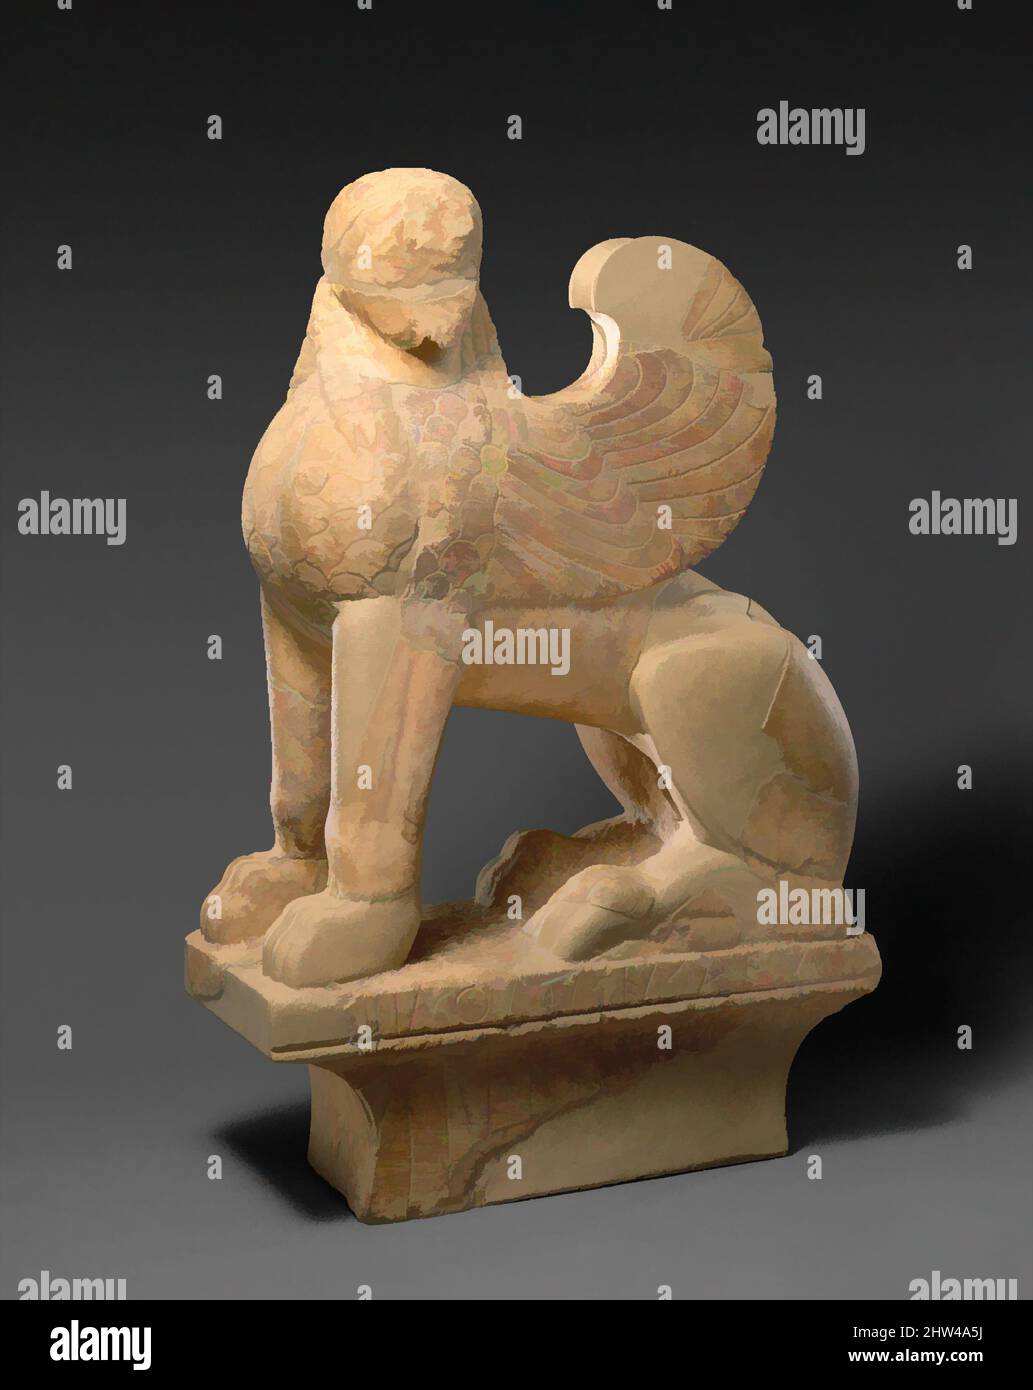 Art inspired by Marble sphinx on a cavetto capital, Archaic, ca. 580–575 B.C., Greek, Attic, Marble, H. with akroterion 28 3/8 in. (72 cm), Stone Sculpture, Inscribed on the plinth, I am the monument of ...linos. This sphinx and capital once crowned the tall grave shaft of a youth or, Classic works modernized by Artotop with a splash of modernity. Shapes, color and value, eye-catching visual impact on art. Emotions through freedom of artworks in a contemporary way. A timeless message pursuing a wildly creative new direction. Artists turning to the digital medium and creating the Artotop NFT Stock Photo